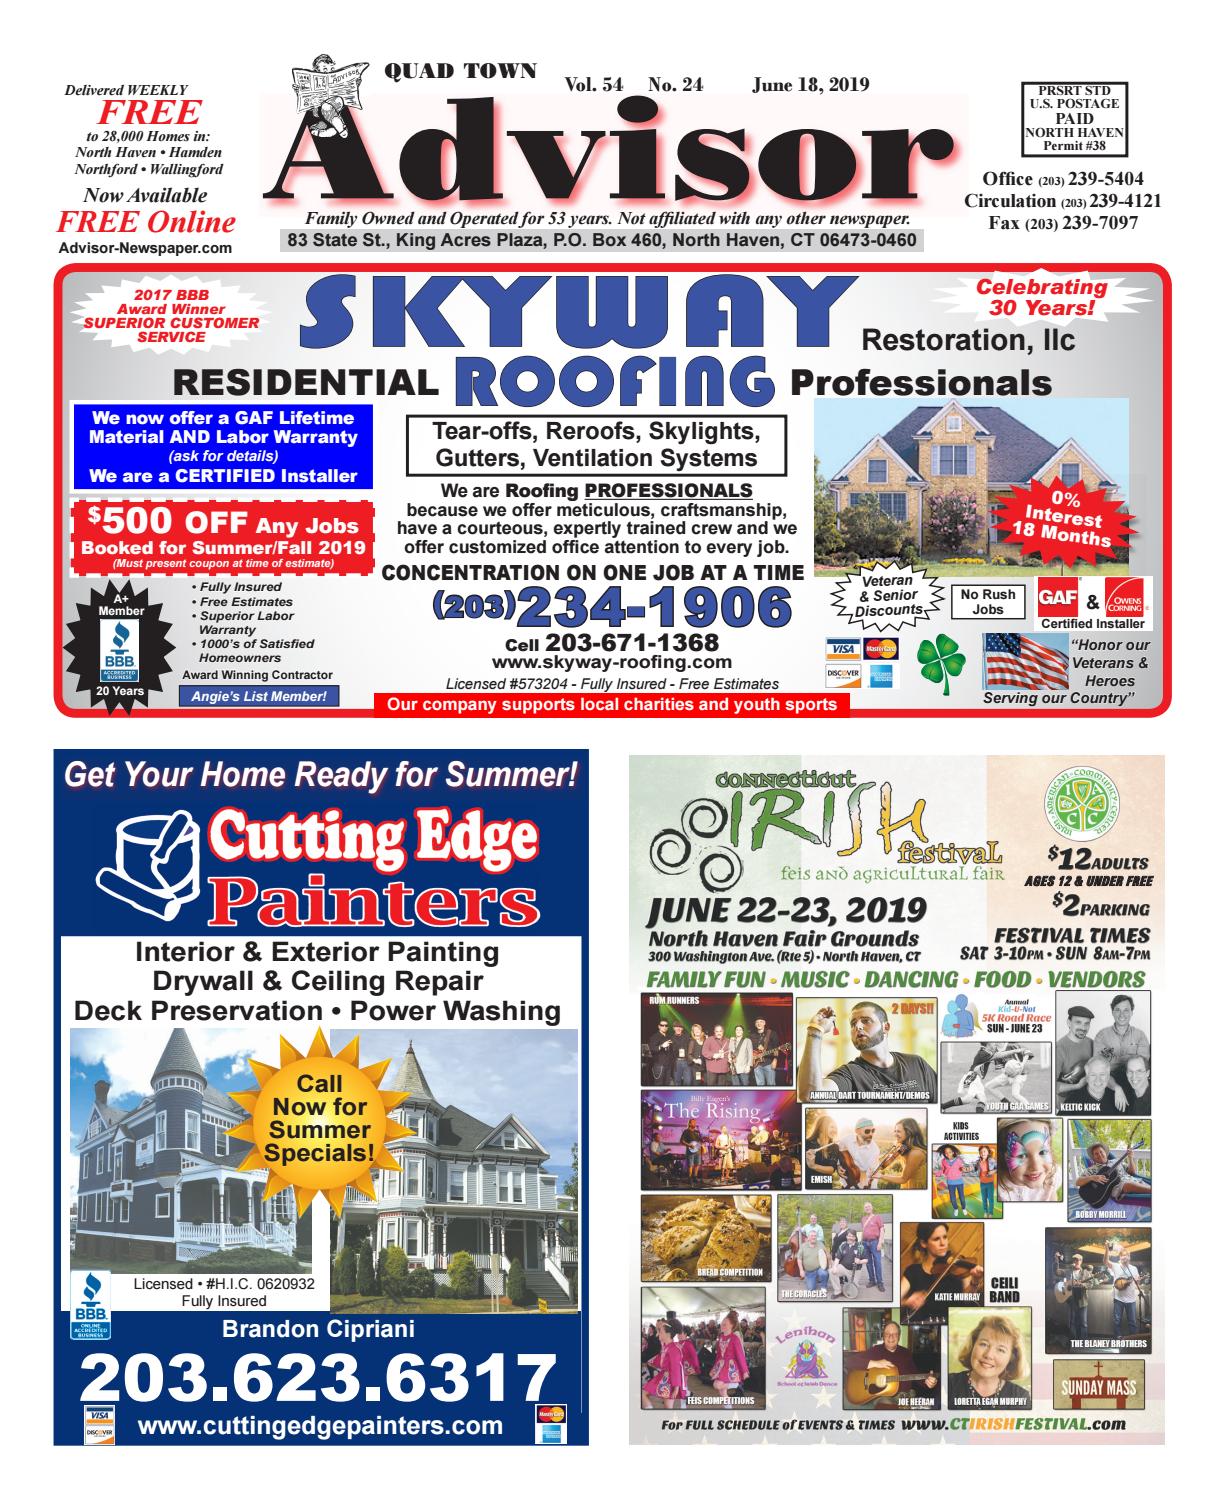 Kerns Fireplace and Spa Best Of the Advisor June 18 2019 by the Advisor Newspaper issuu